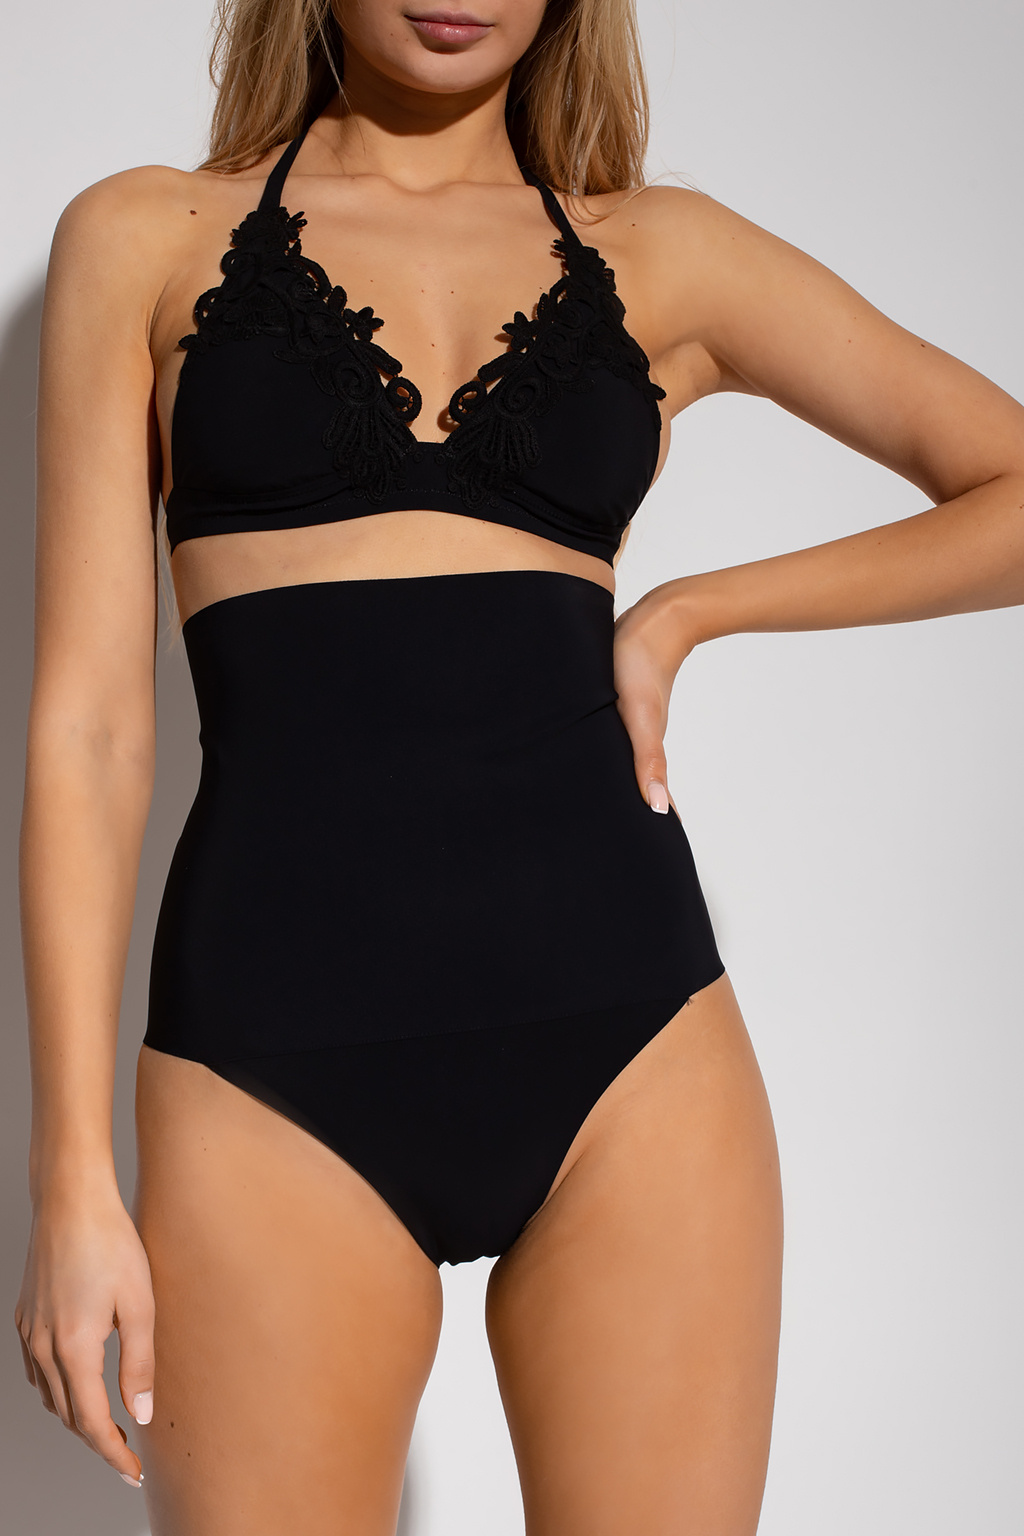 Boots / wellingtons ‘Misi’ swimsuit top